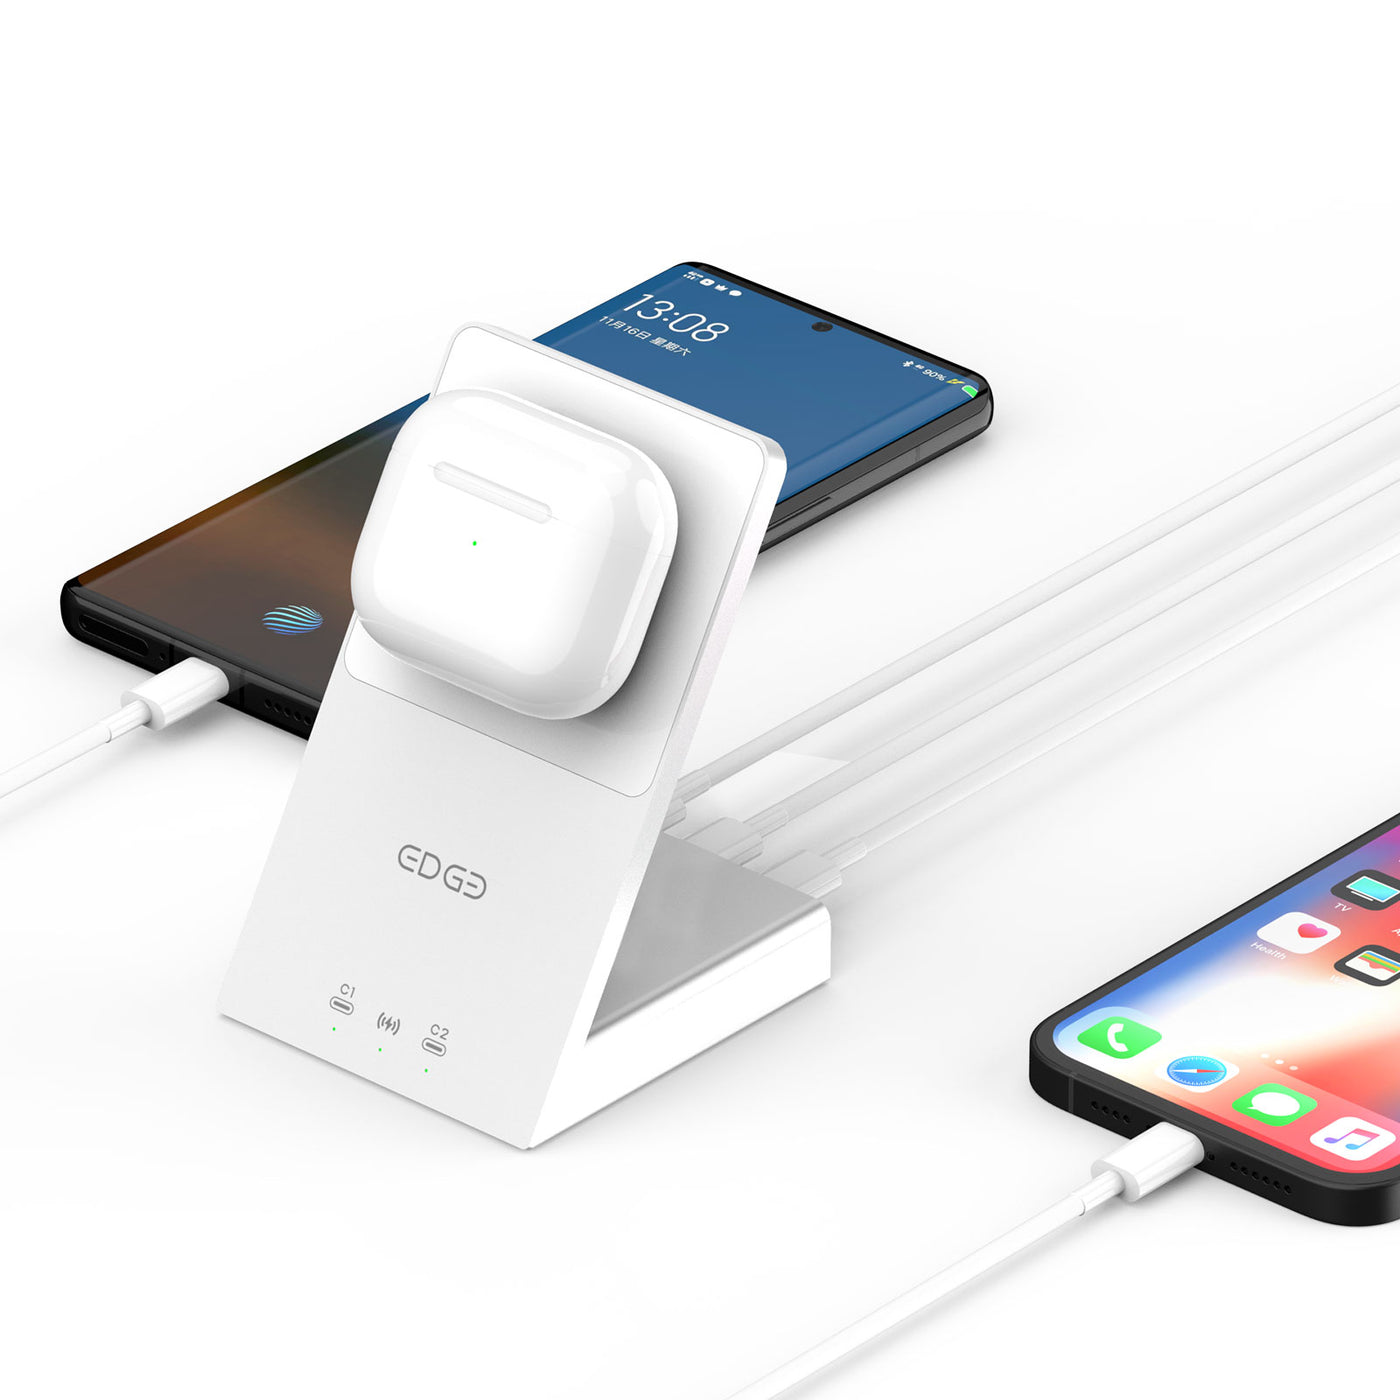 LIMETA MD100: 3-in-1 Wireless Charger for MagSafe Charger Stand - 45W